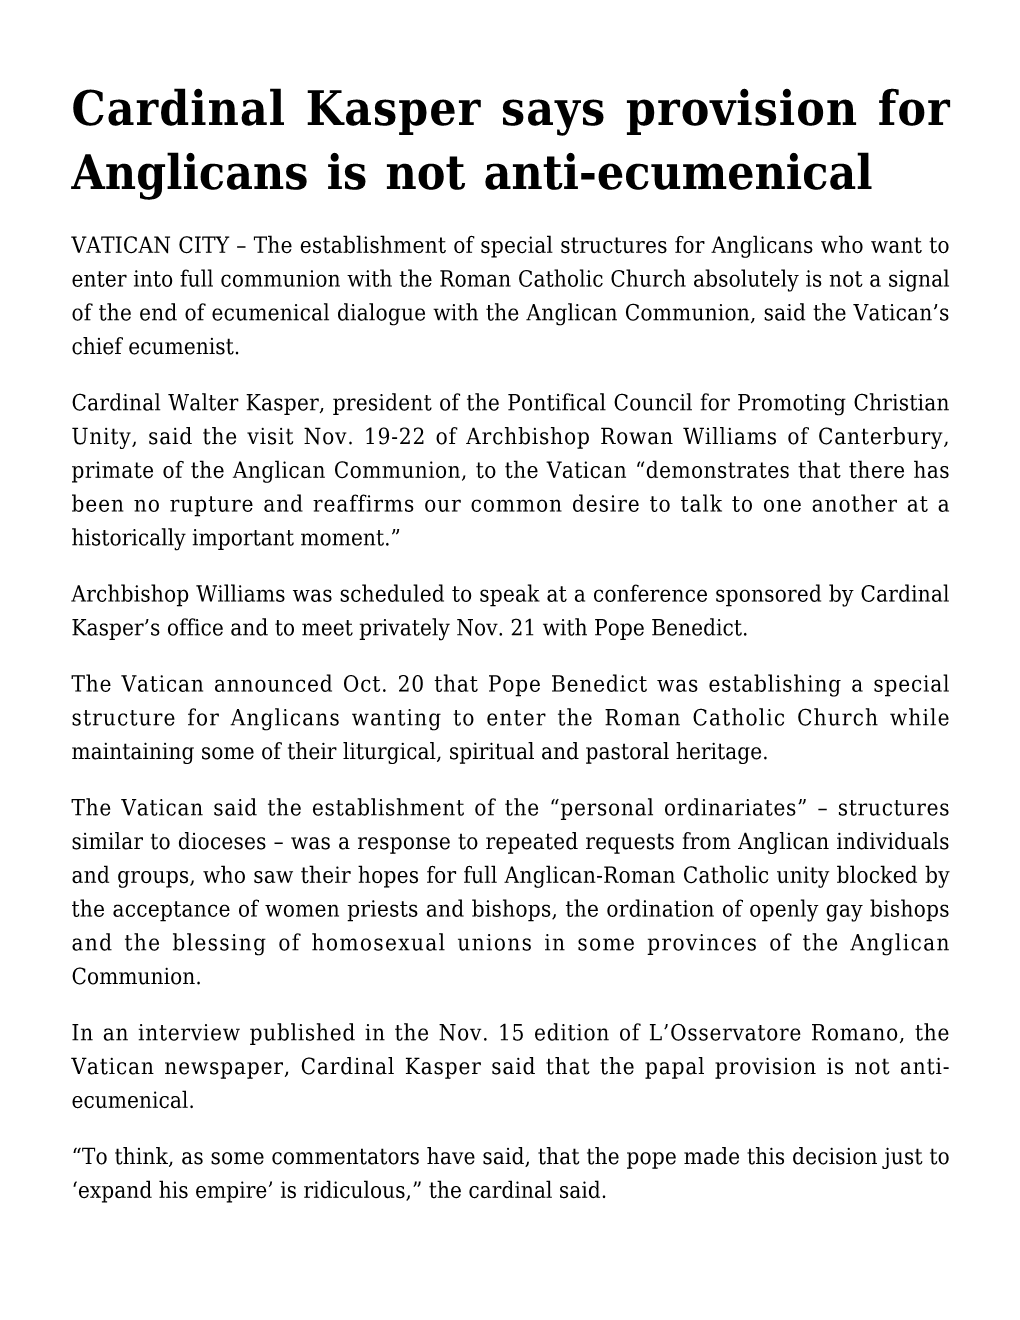 Cardinal Kasper Says Provision for Anglicans Is Not Anti-Ecumenical